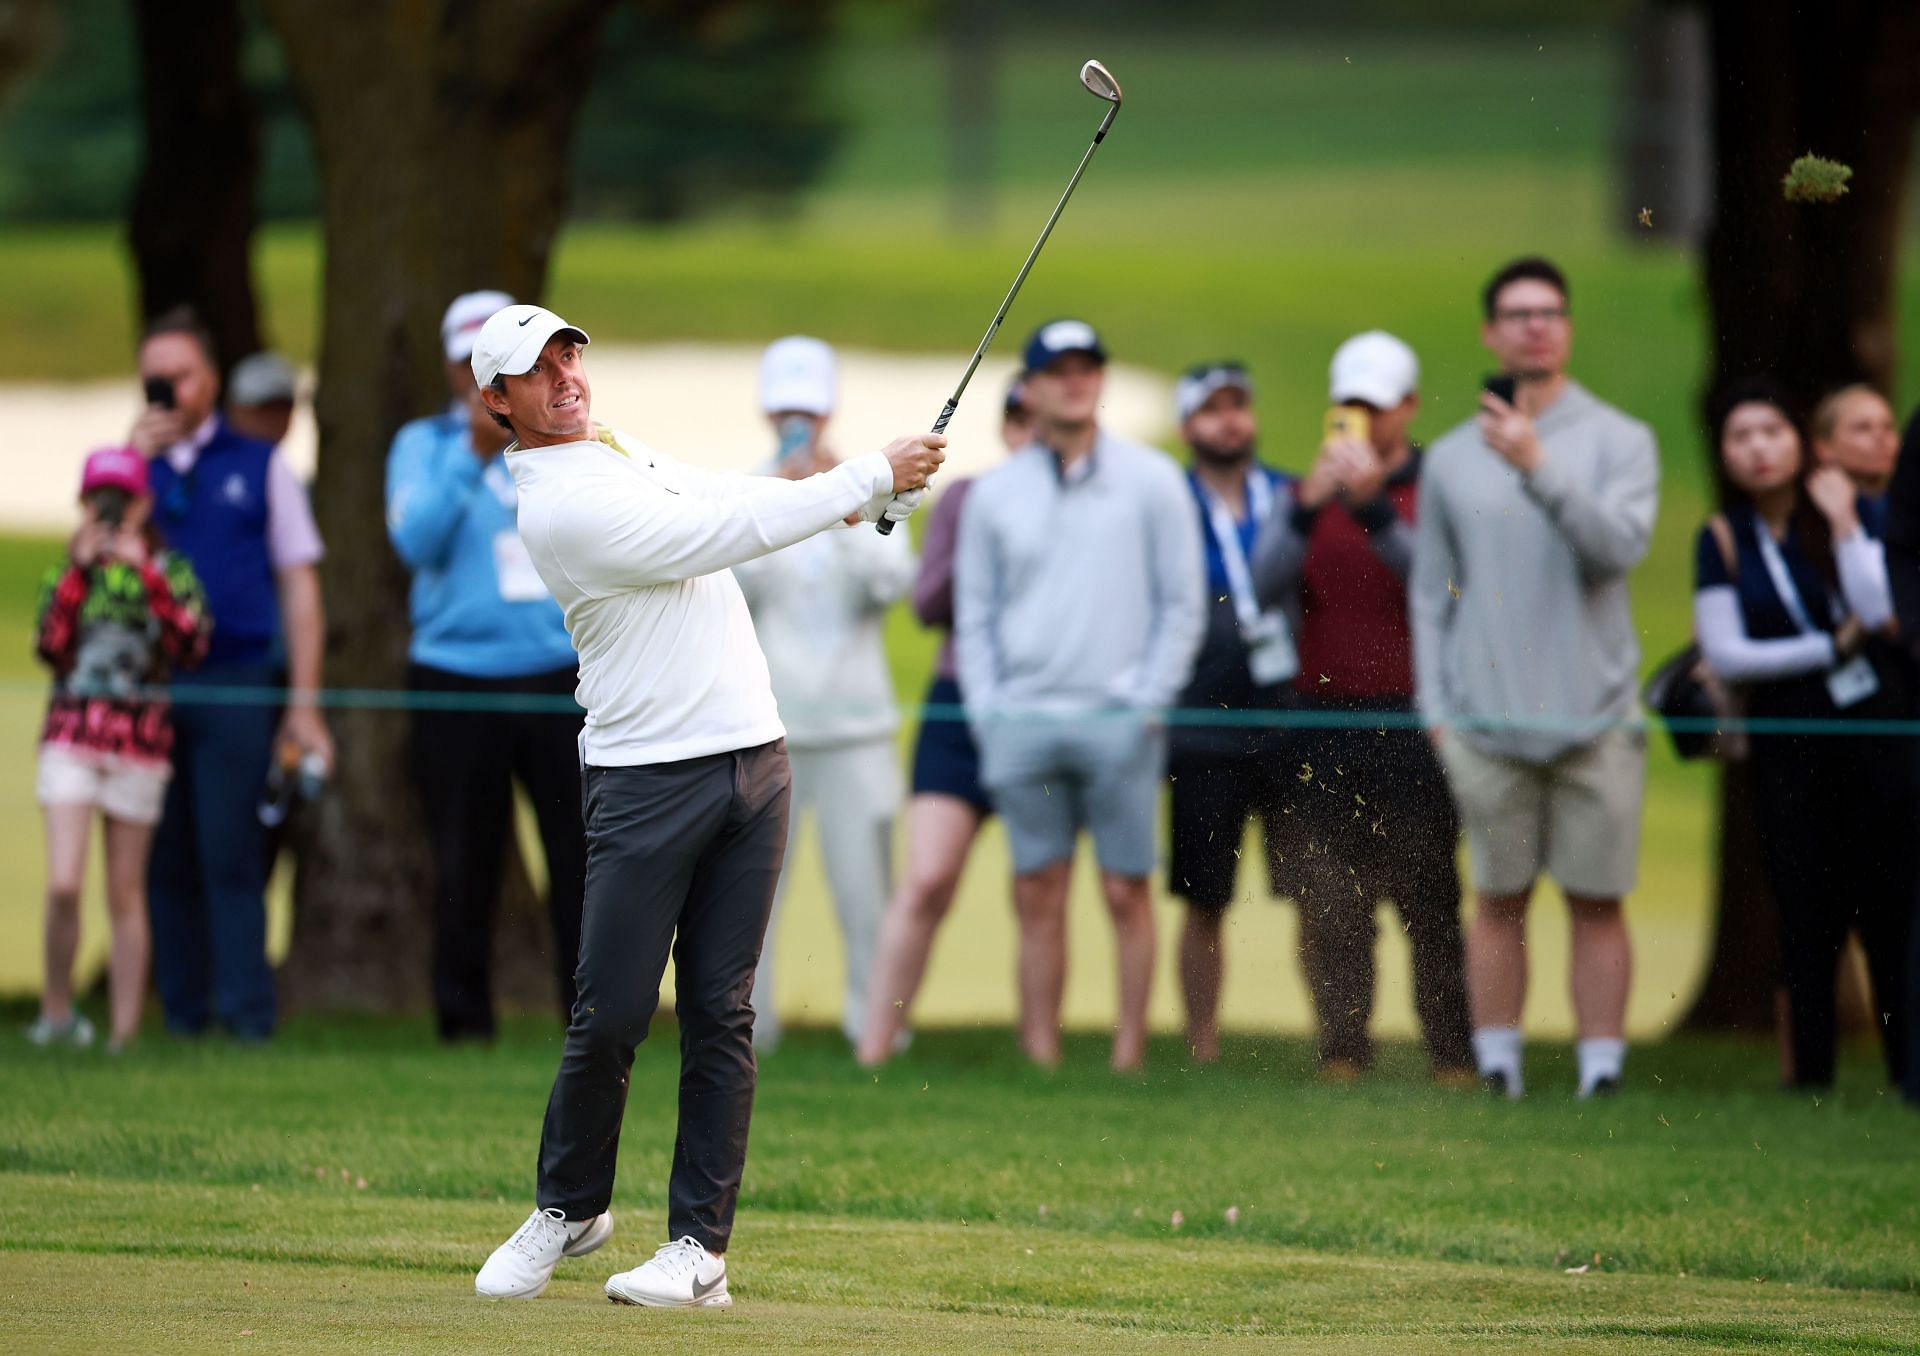 Rory McIlroy at the 2023 RBC Canadian Open previews (Image via Getty).